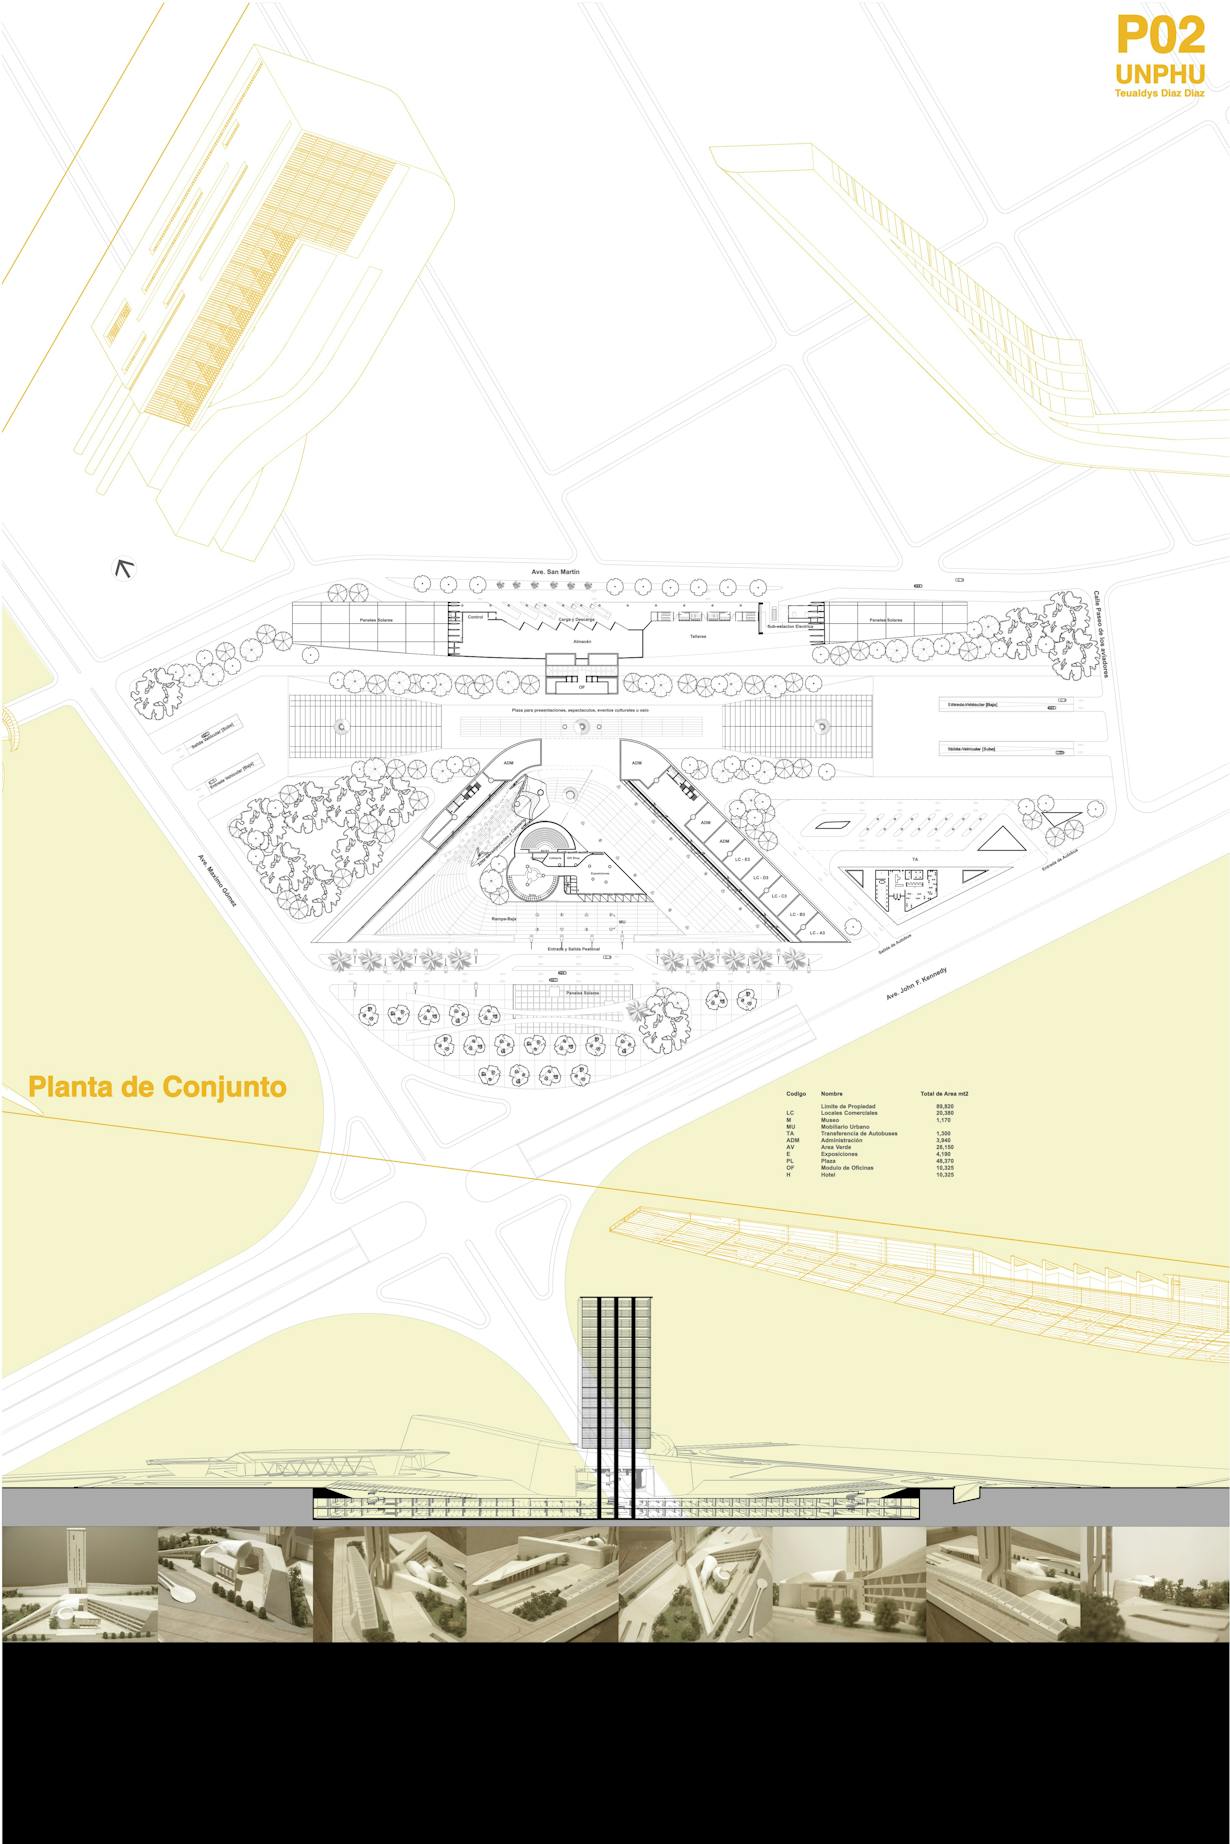 thesis about convention center